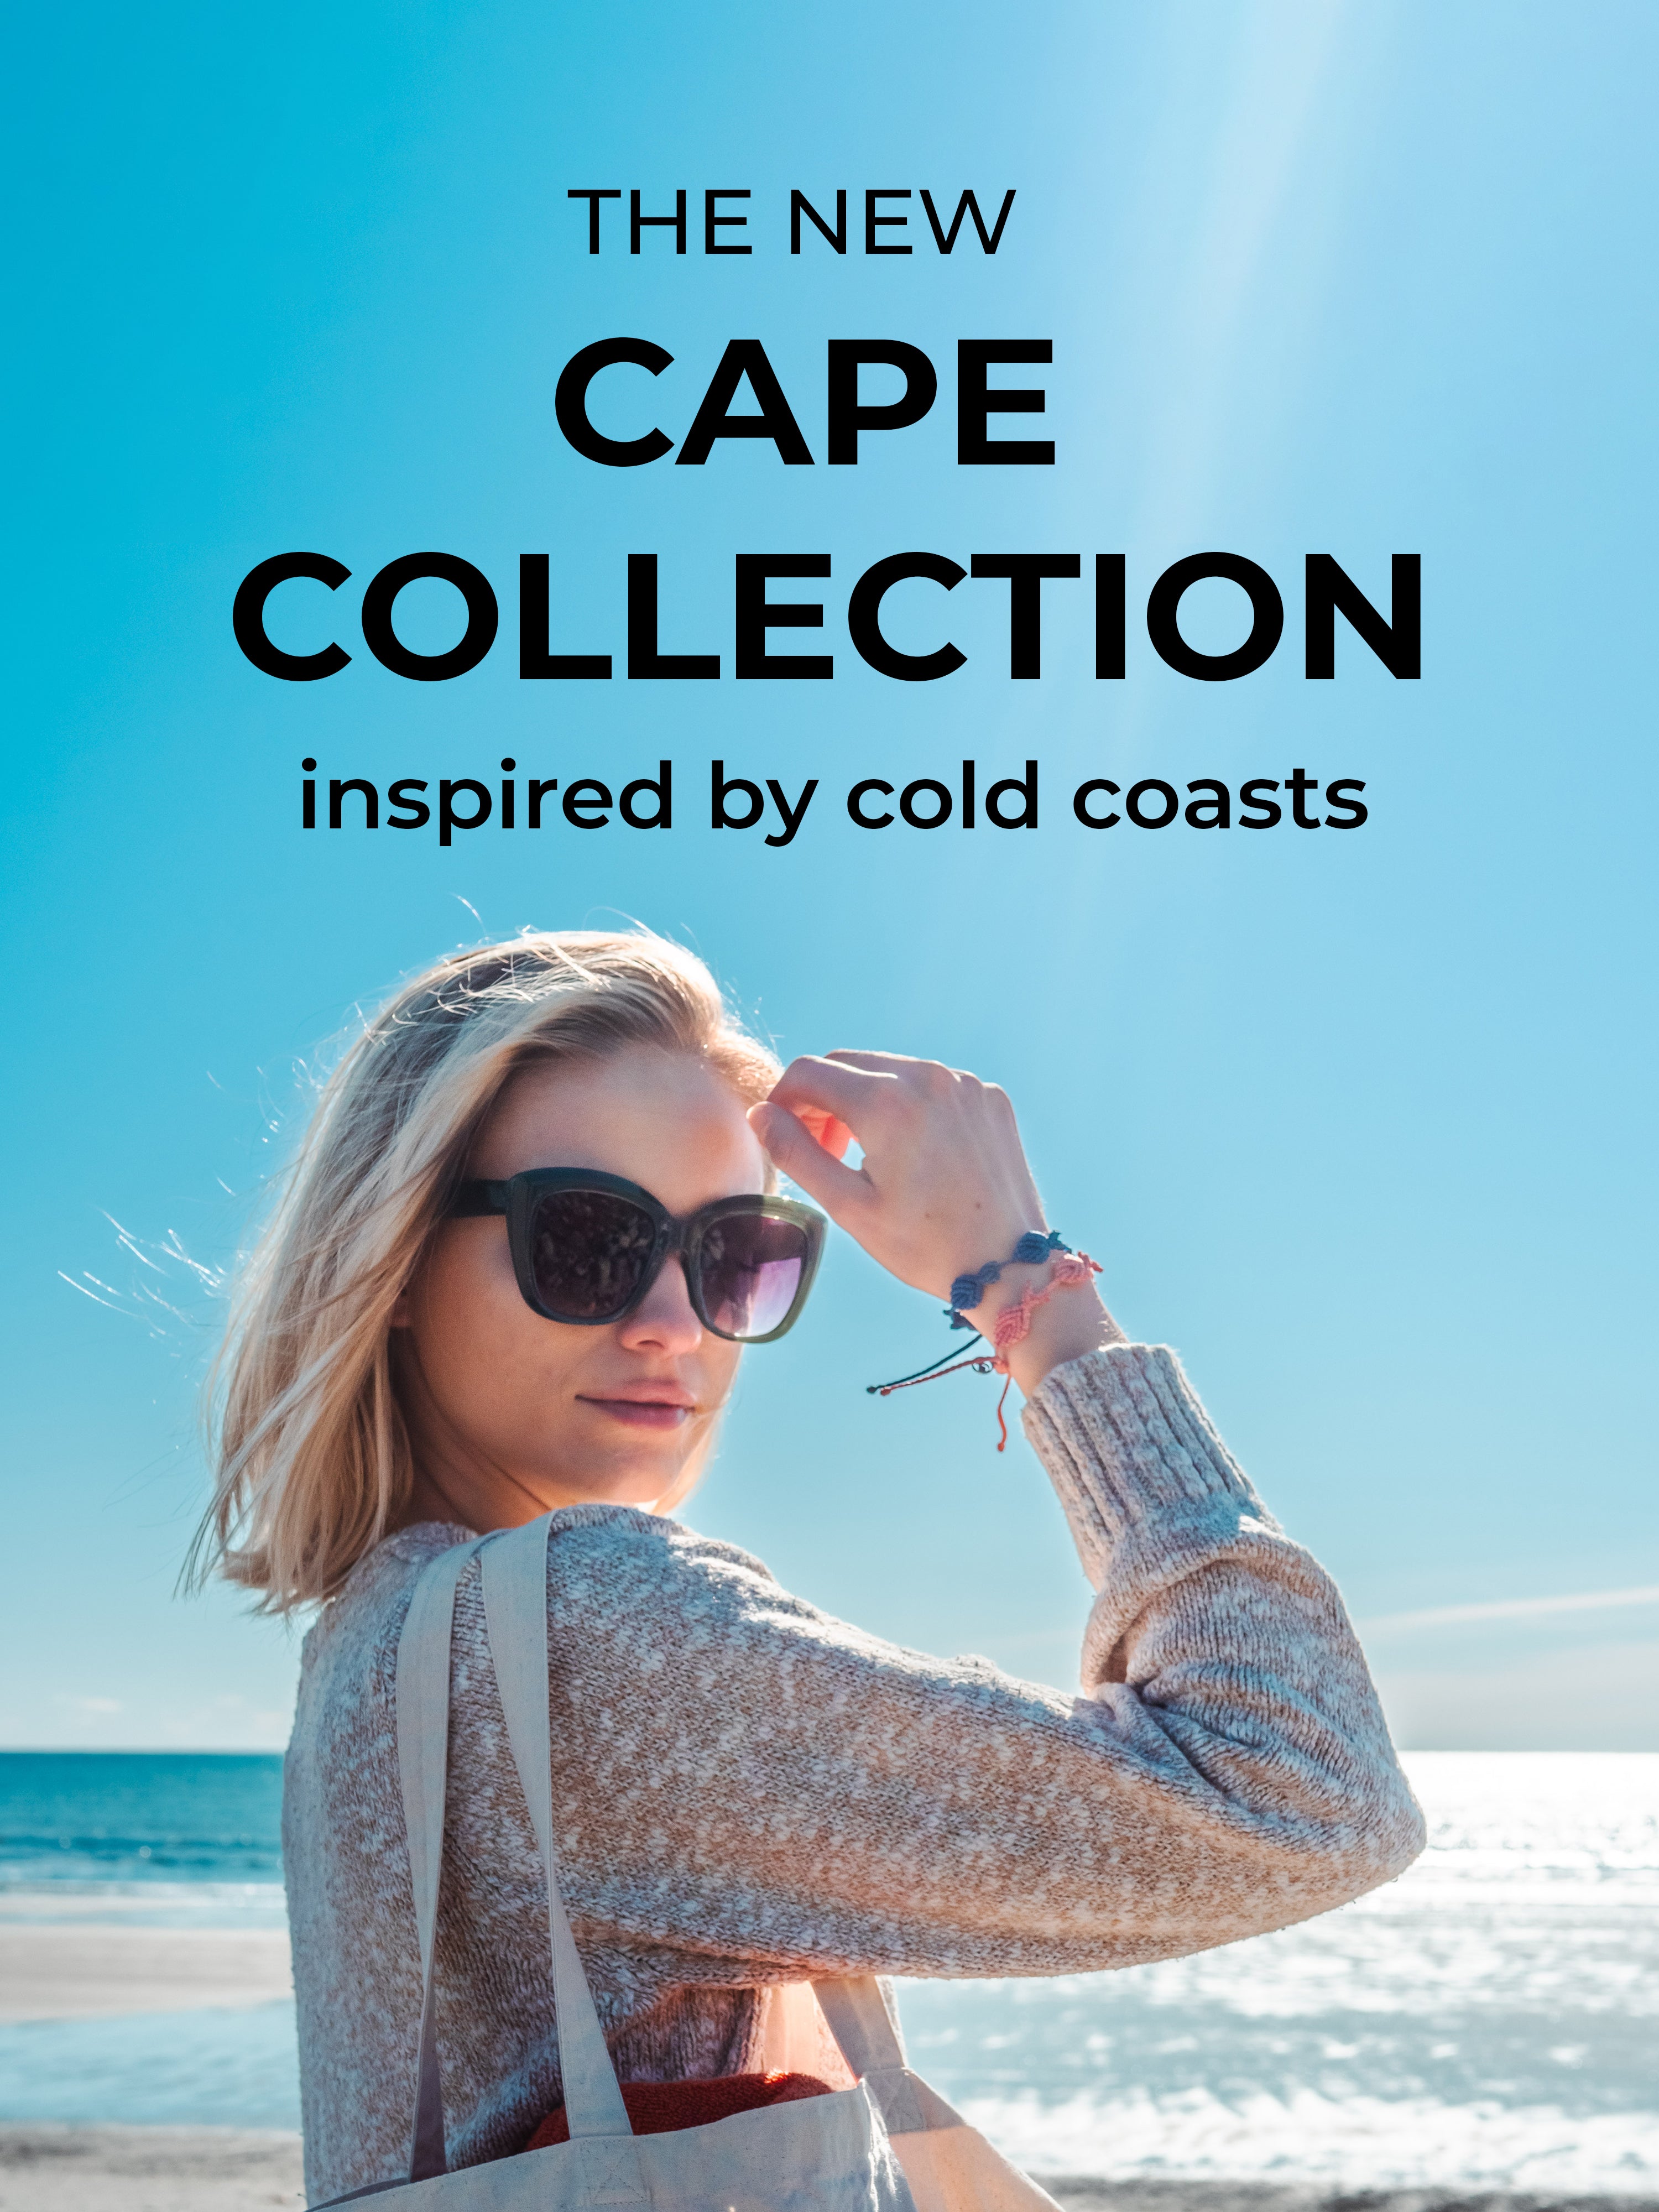 CapeCollection_Email_V3.1.jpg__PID:d857c635-6a93-4ea0-86da-f79398f71624